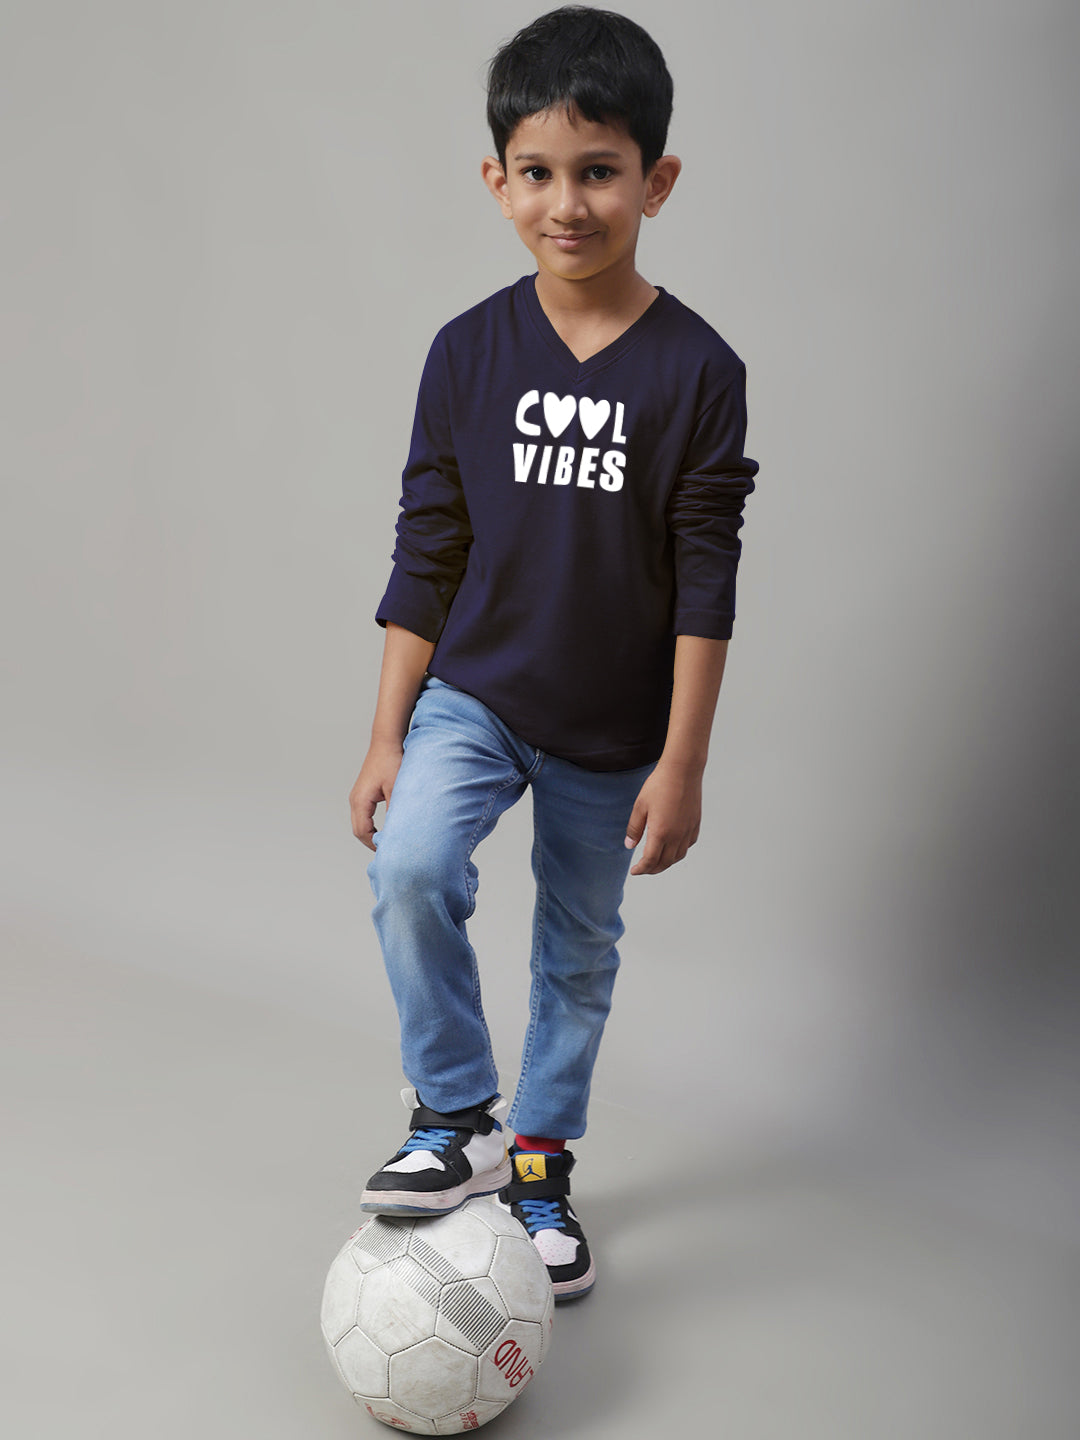 Boys Cool Vibes Full Sleeves Printed T-Shirt - Friskers